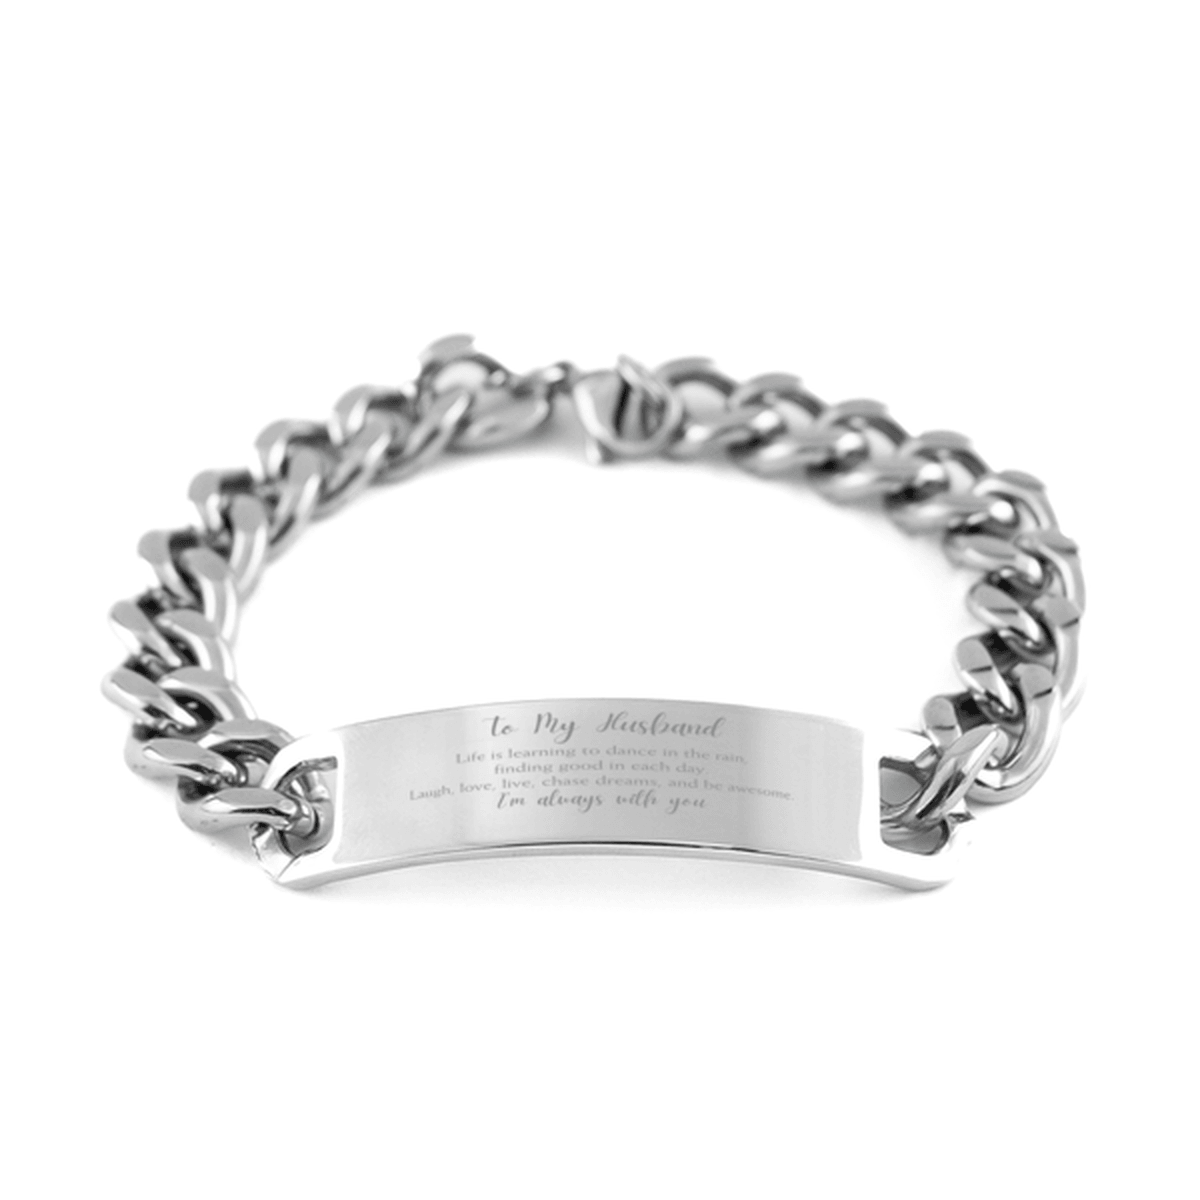 Husband Cuban Chain Stainless Steel Engraved Bracelet, Motivational Birthday Valentine Gifts Life is learning to dance in the rain, finding good in each day. I'm always with you - Mallard Moon Gift Shop